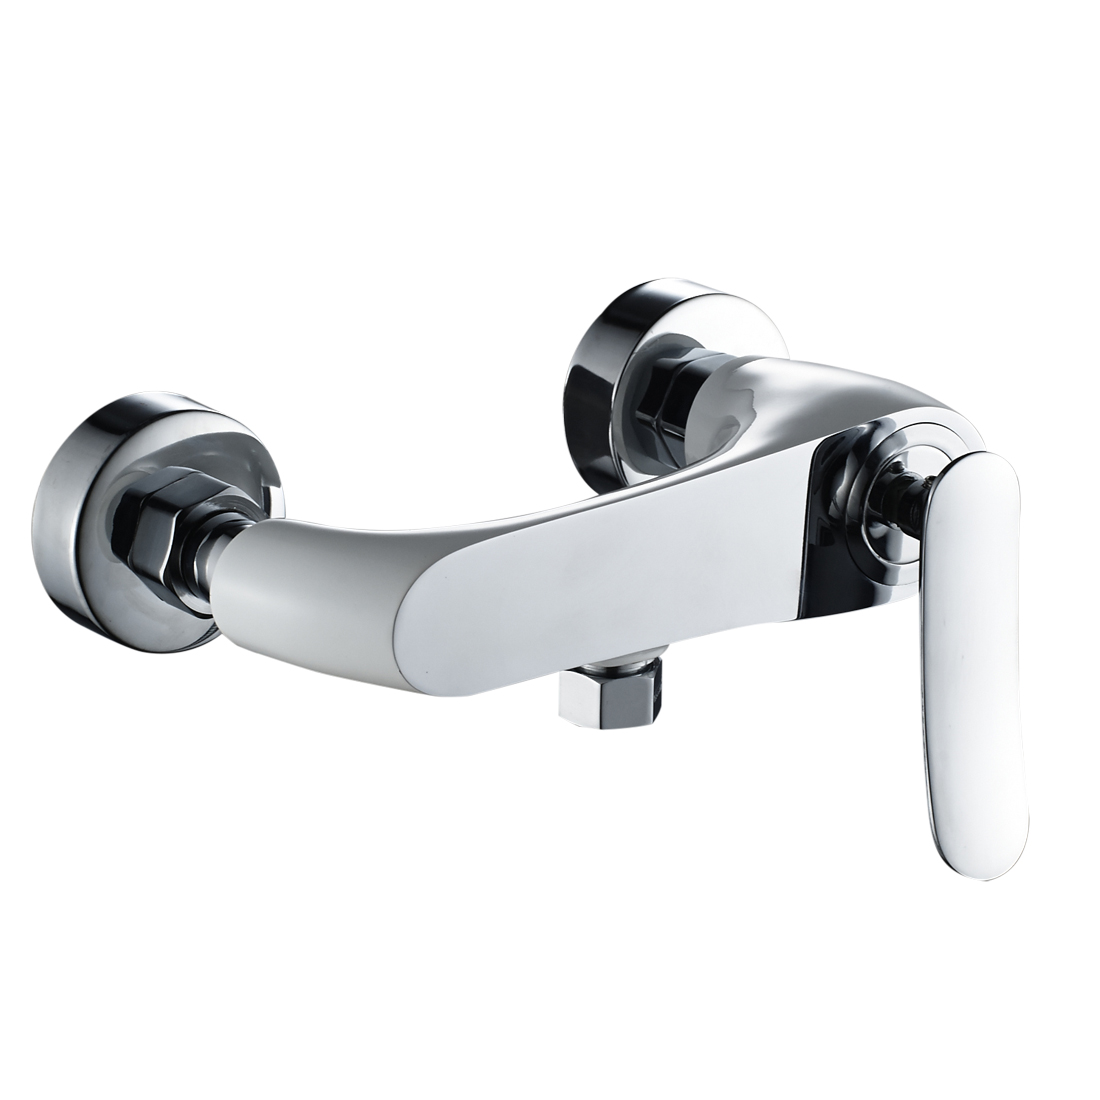 Shower Mixer Valve,Wall Mounted Single Lever Manual Exposed Shower Hot/Cold Valve Tap Faucet,White with Chrome Finish